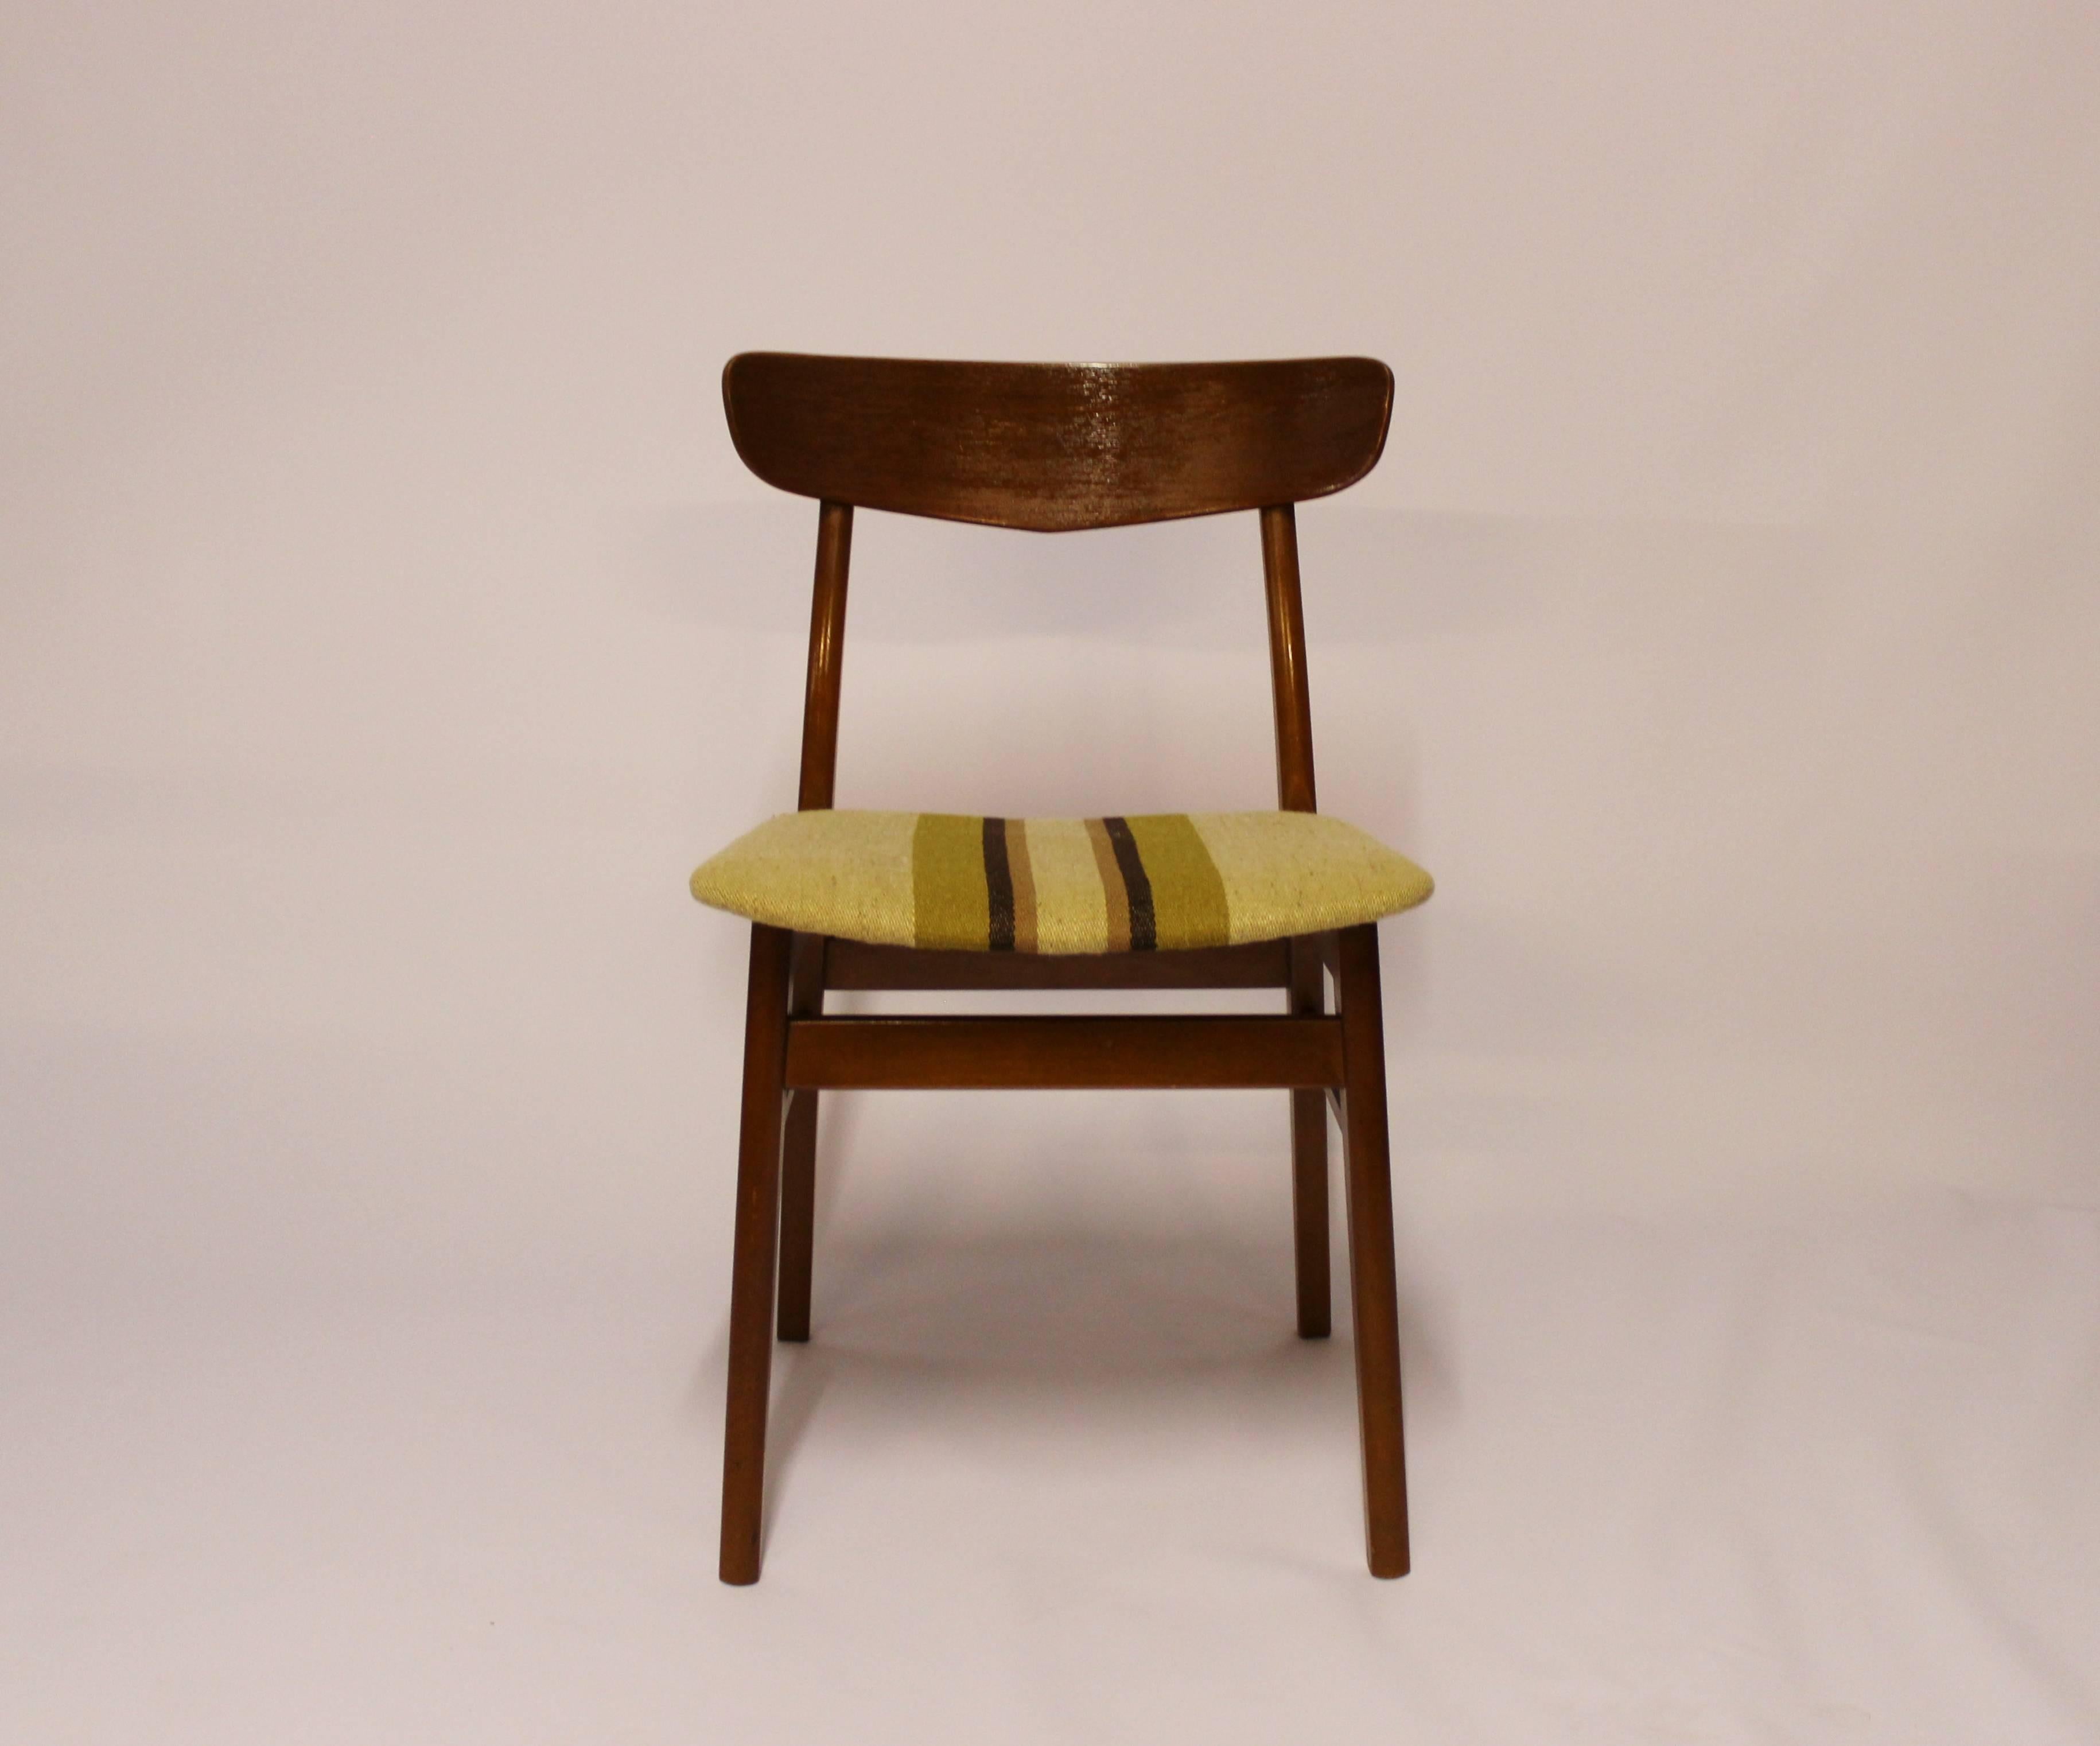 Set of six dining chairs in teak and upholstered in green striped wool, of Danish design from the 1960s. The chairs are in great vintage condition.

*Only sold together as a set of 6*

This product will be inspected thoroughly at our professional